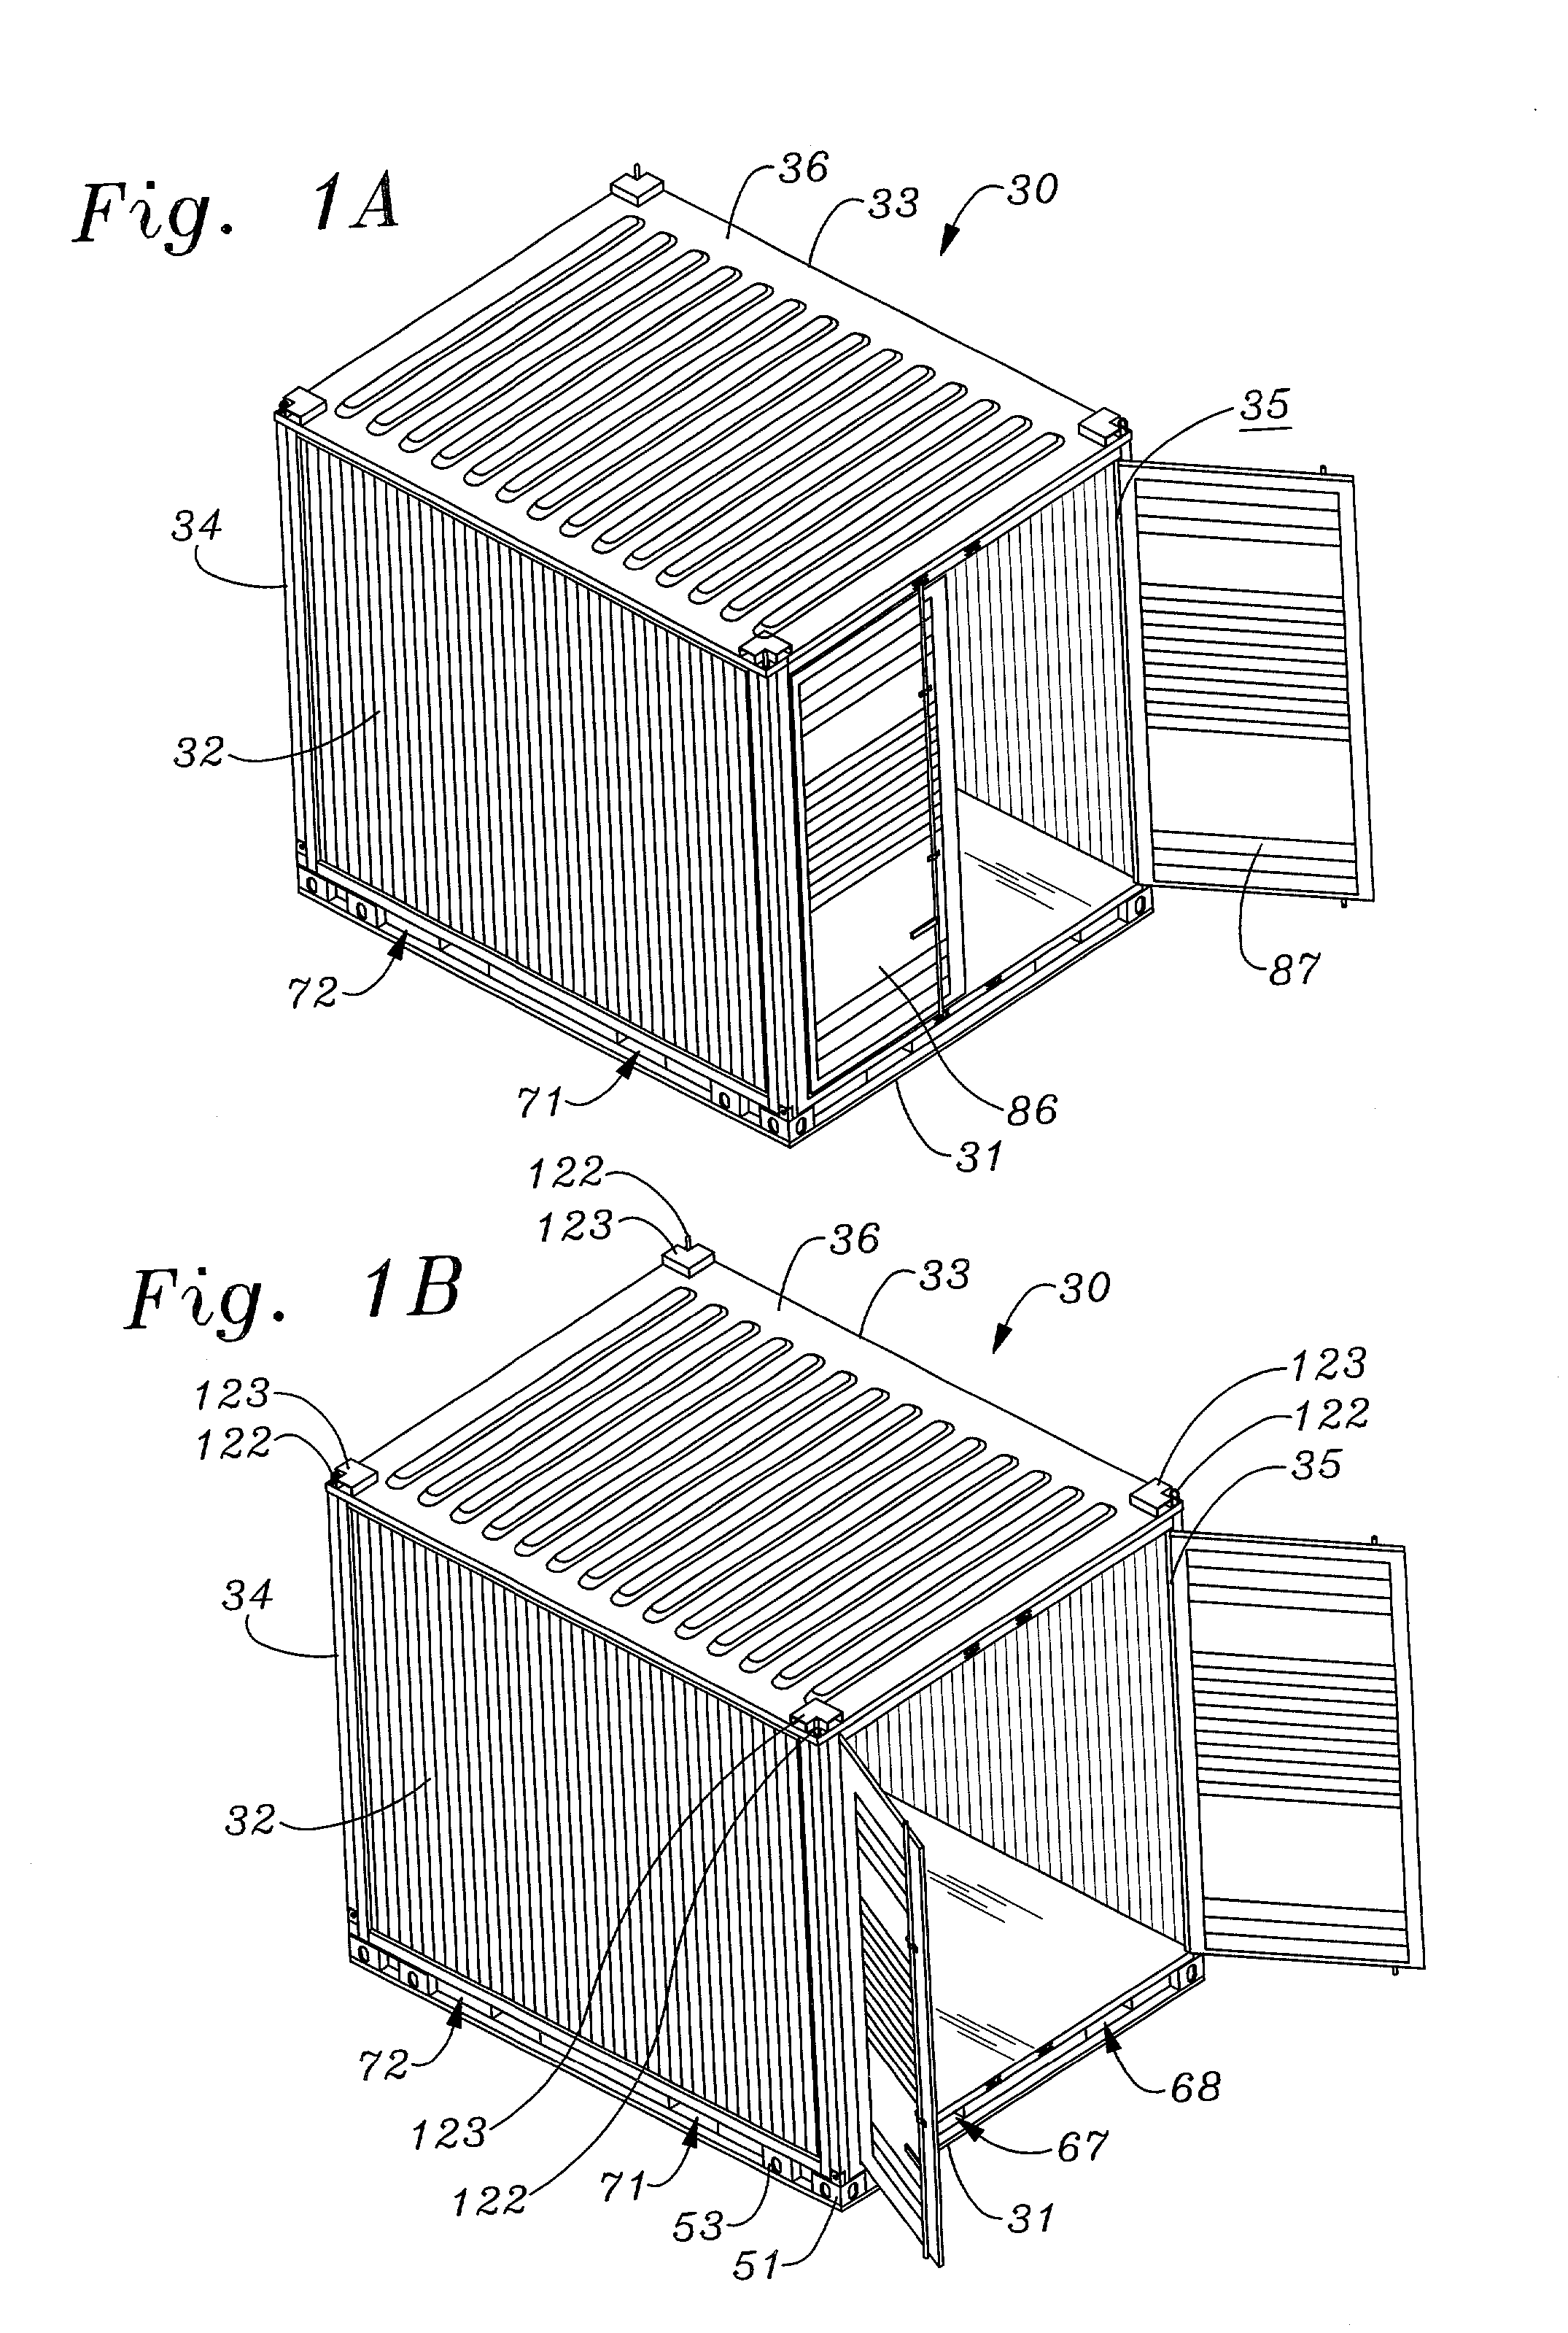 Fold-up storage container